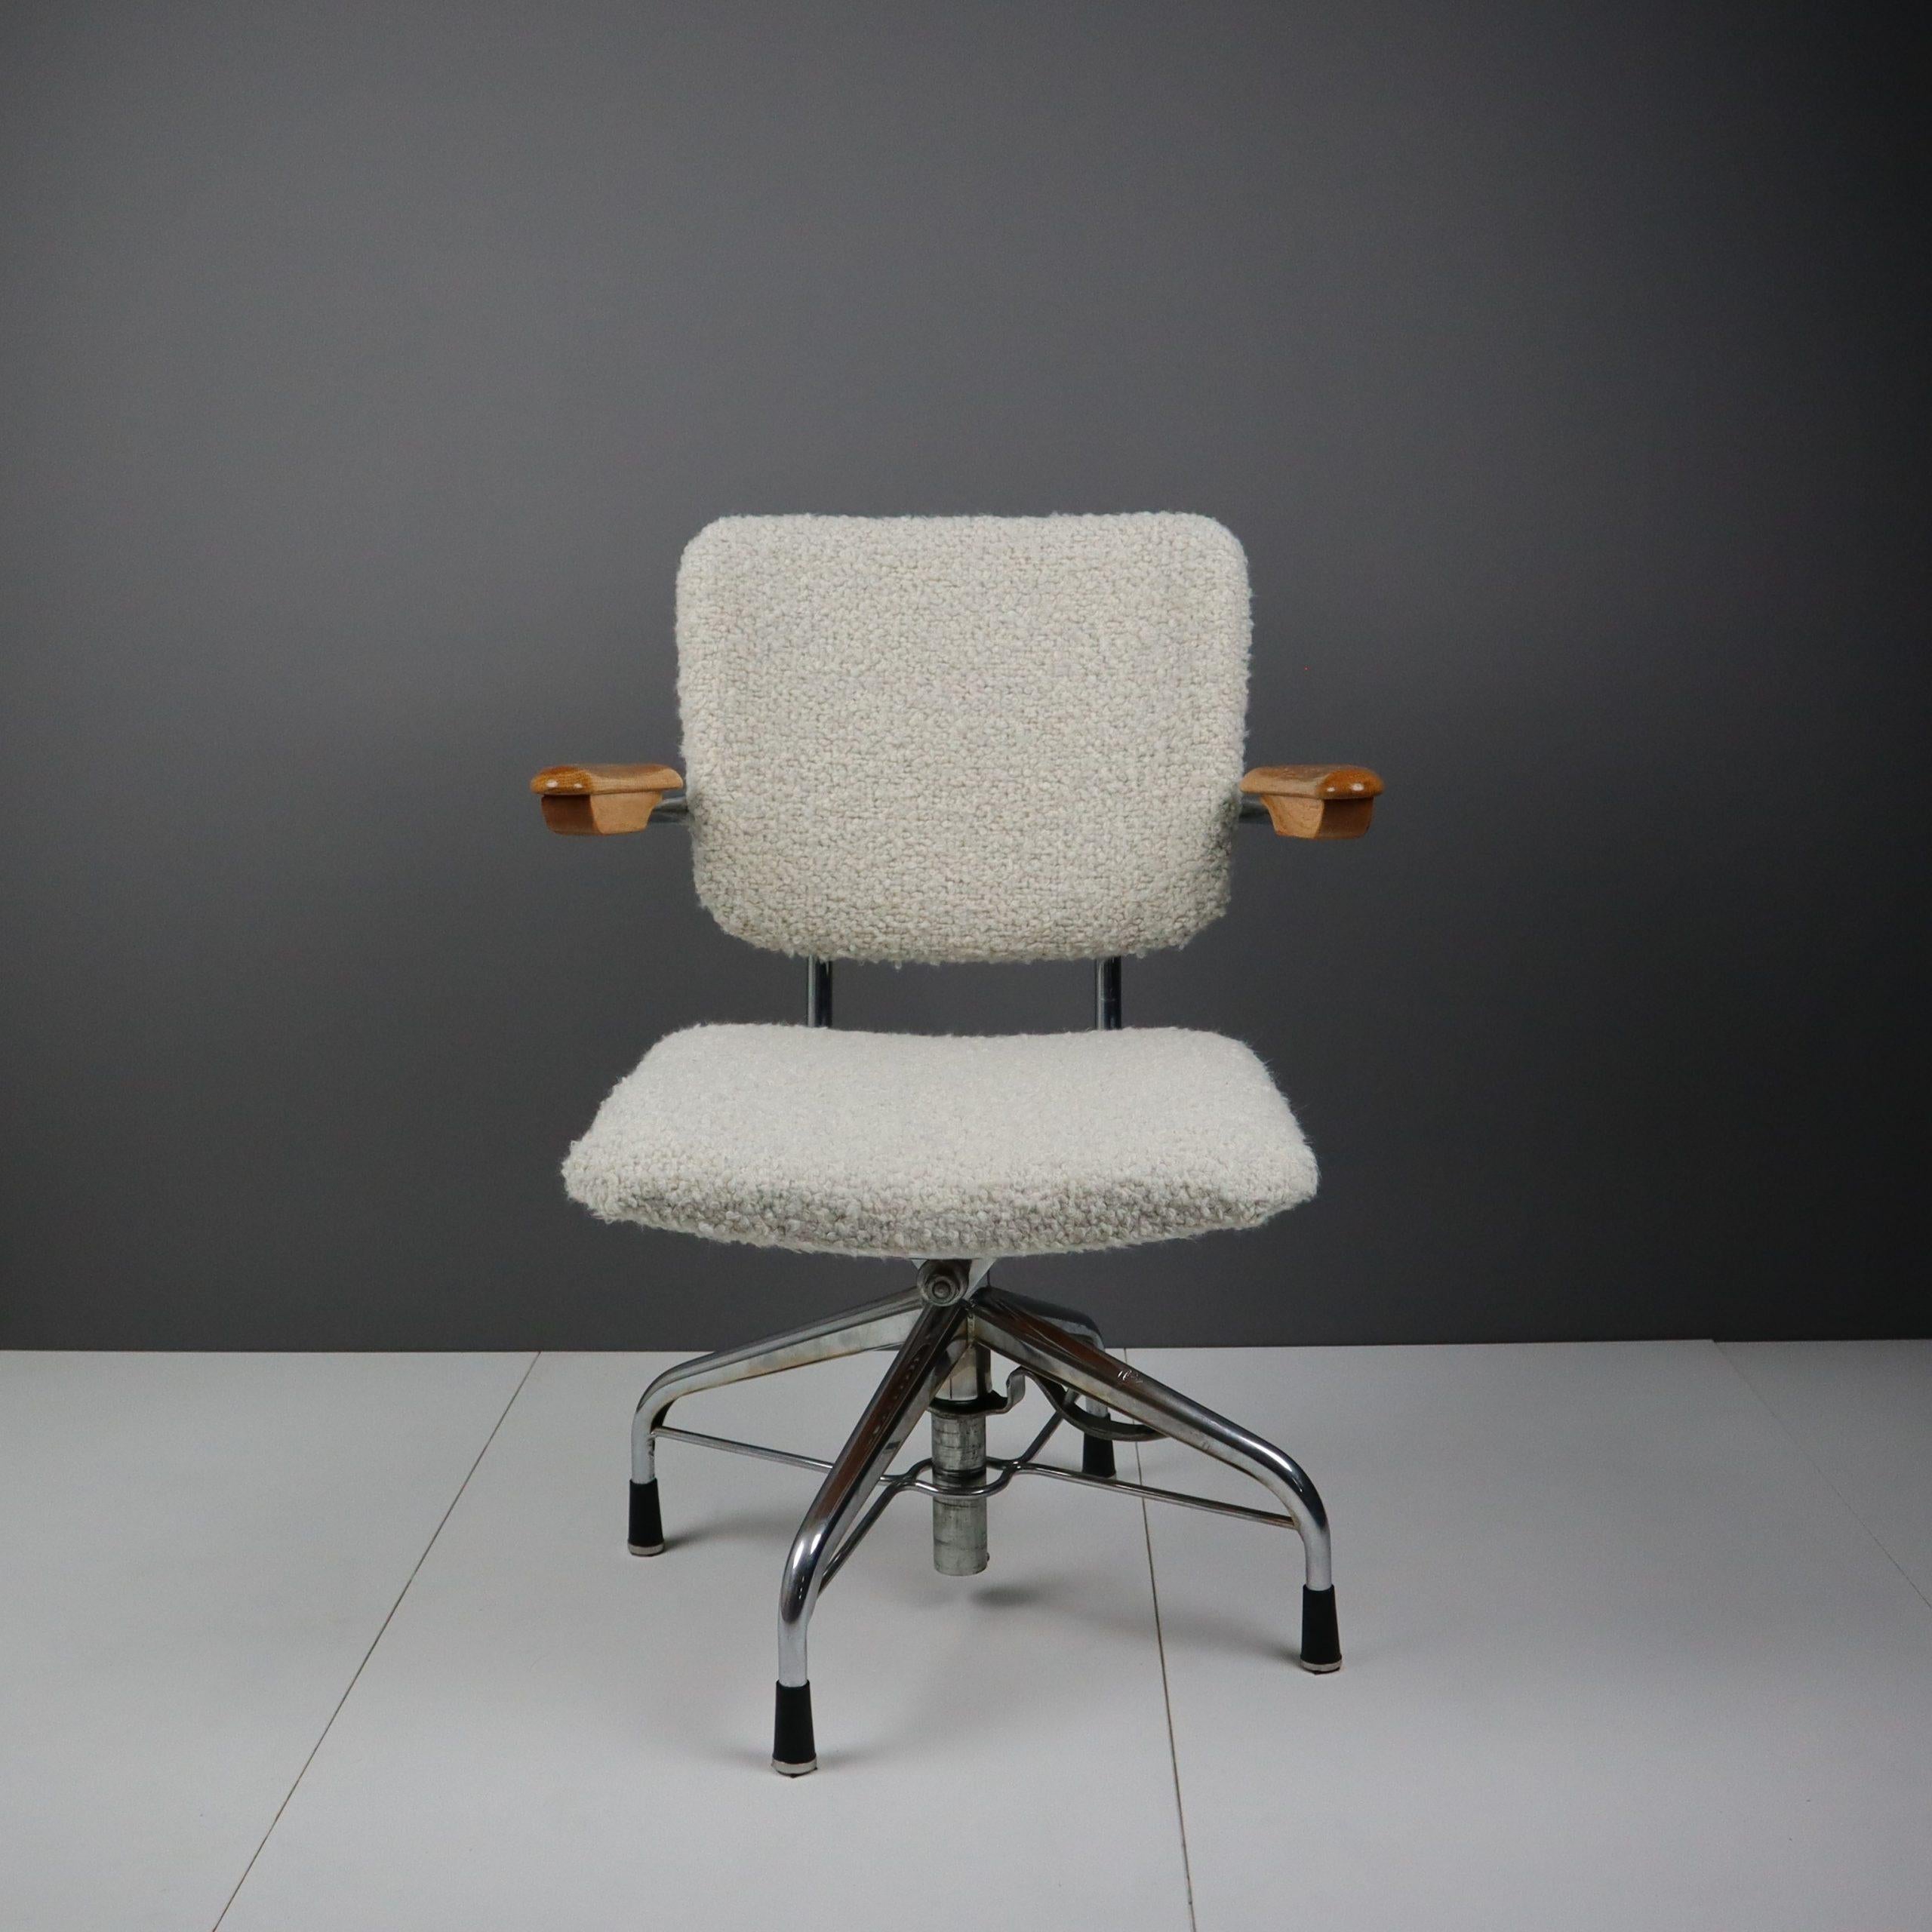 A Swedish midcentury Industrial office chair reupholstered with an Italian off-white bouclé fabric from Designers Guild’s Lana collection.

This chair was bought at an auction in Linköping in the summer of 2021. It’s a Swedish office furniture